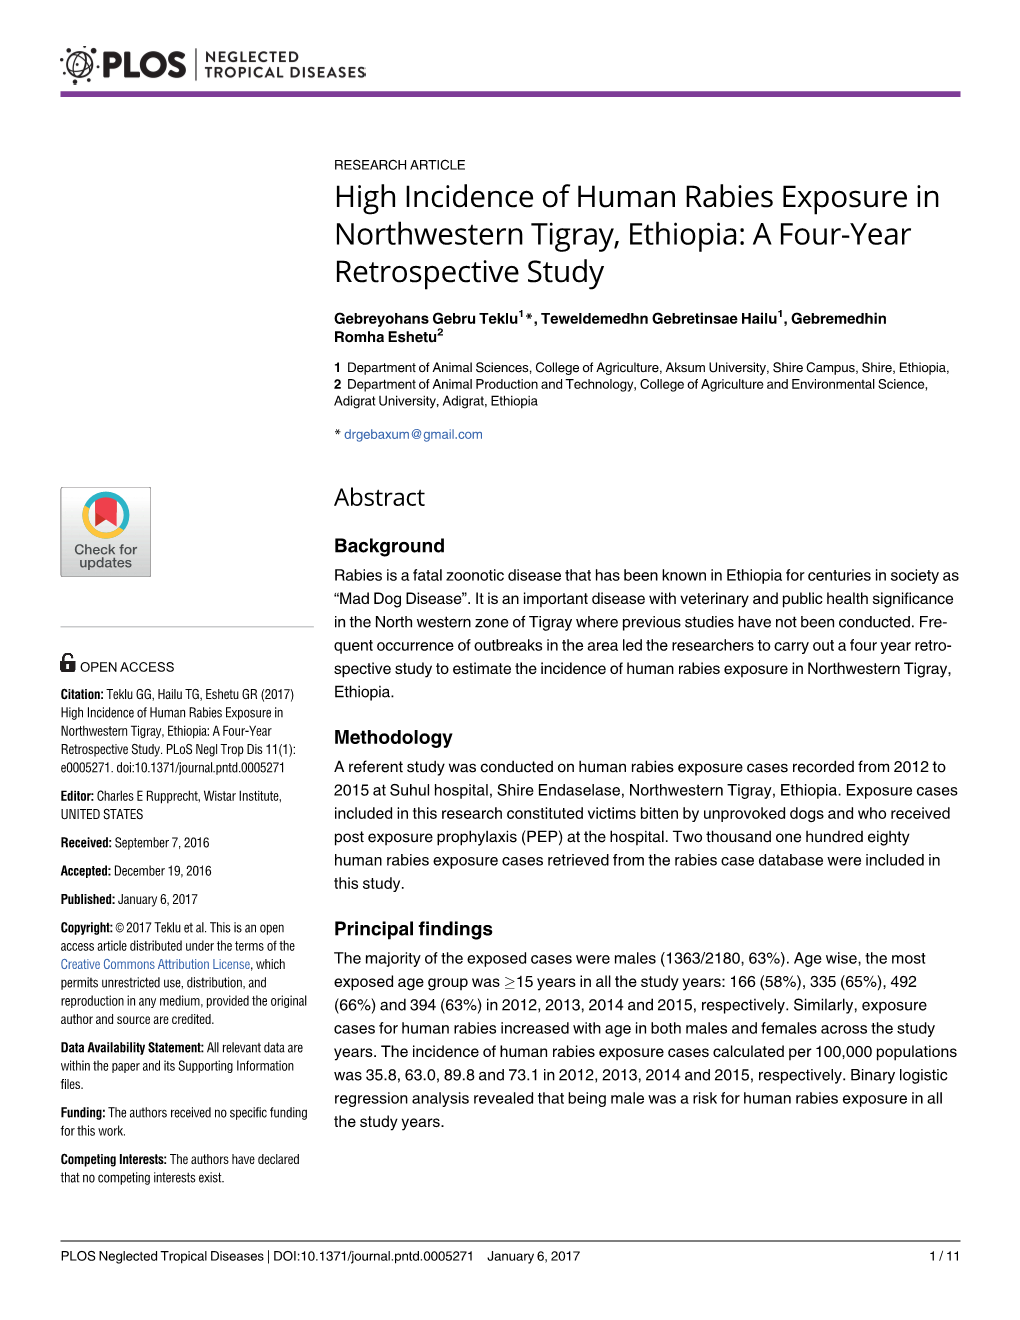 High Incidence of Human Rabies Exposure in Northwestern Tigray, Ethiopia: a Four-Year Retrospective Study